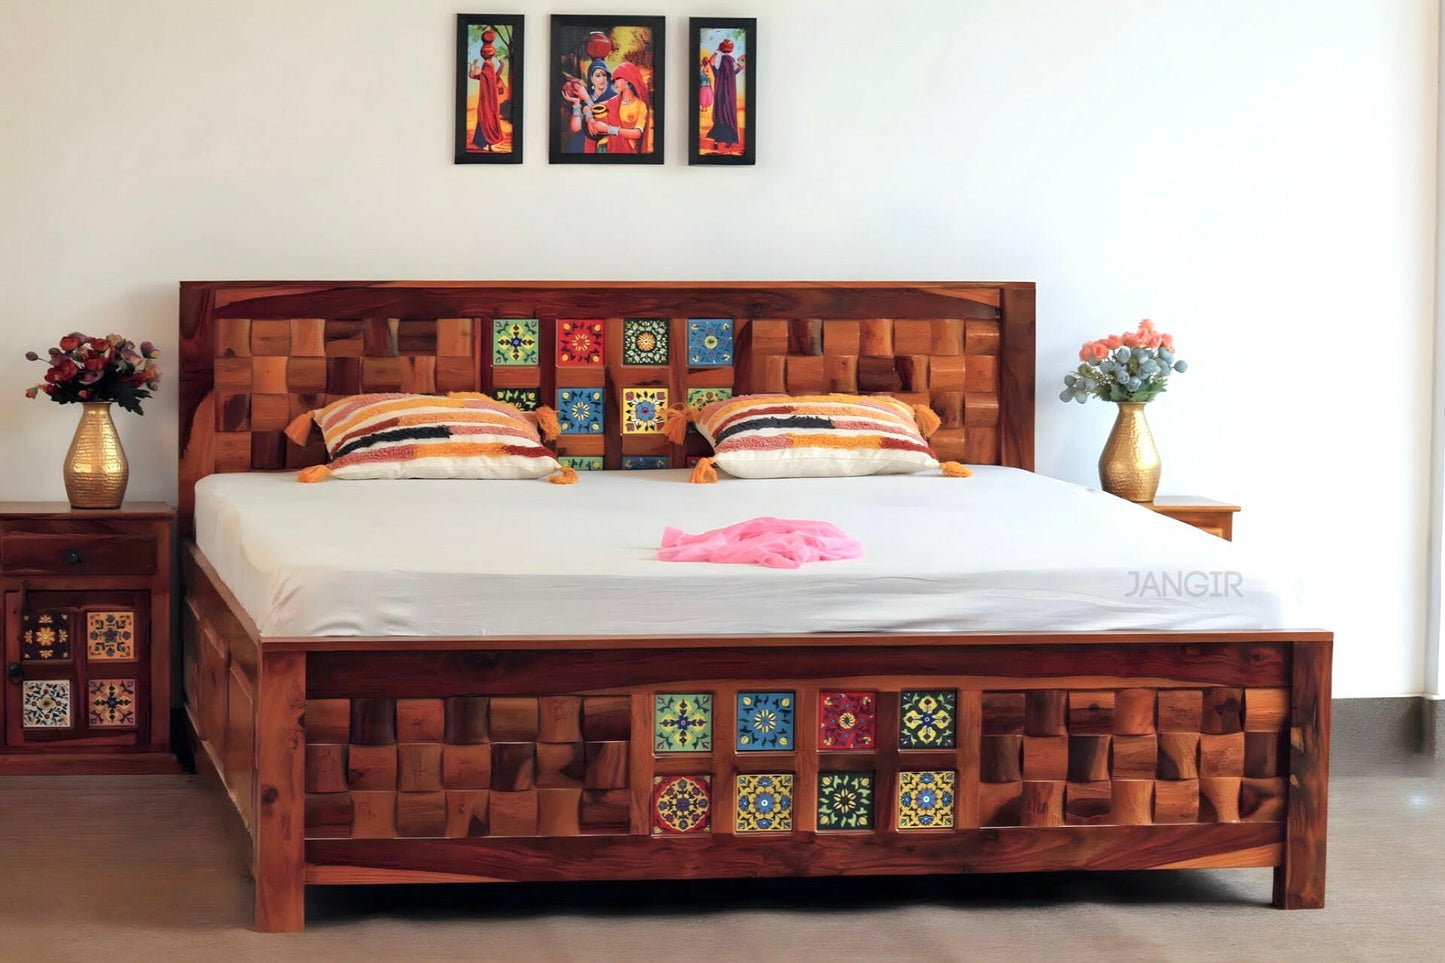 Transform your bedroom with our Tiles Solid Wood Storage Bed, made with sheesham wood and ceramic tiles. Buy wooden beds with storage in Bangalore today!